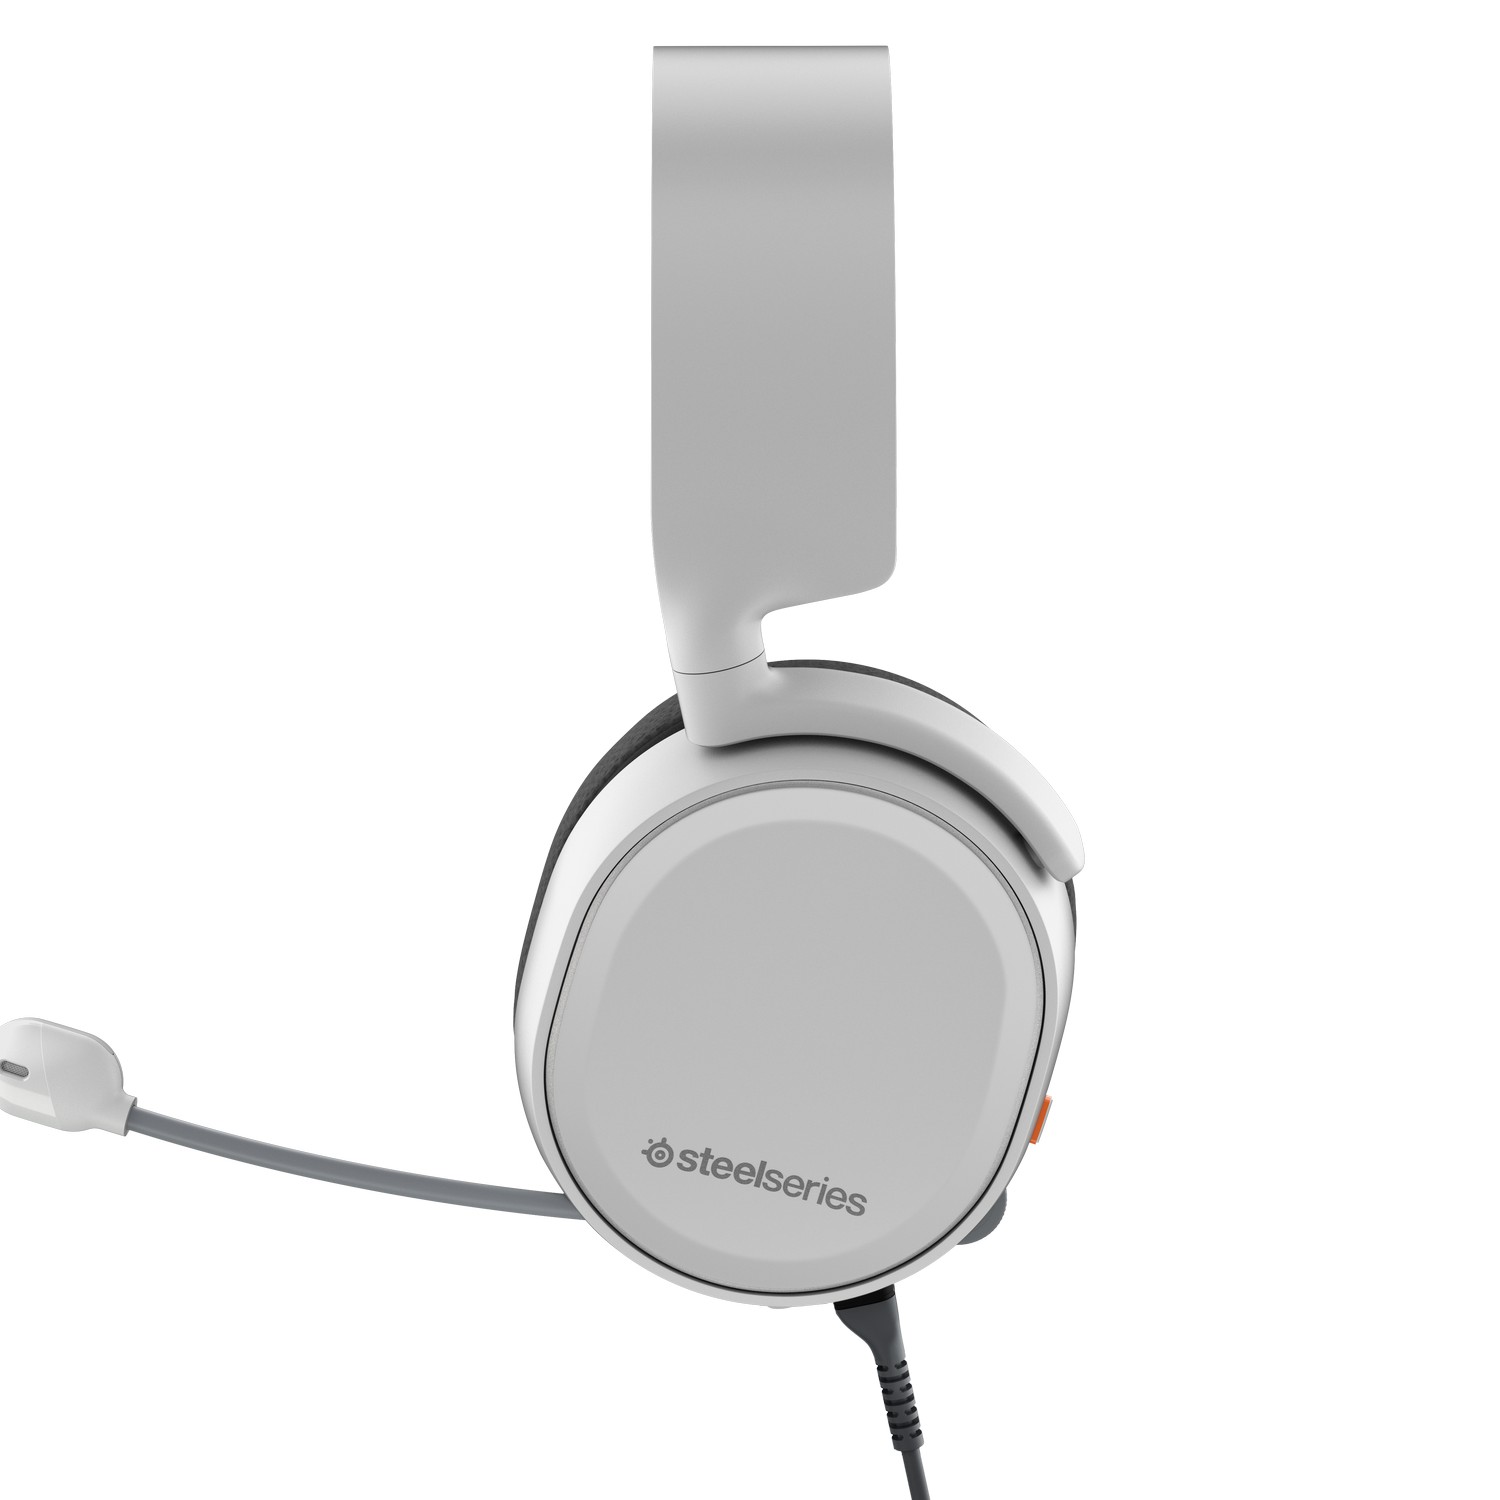 SteelSeries - SteelSeries Arctis 3 7.1 Surround Gaming Headset - White (61506) 2019 Edition